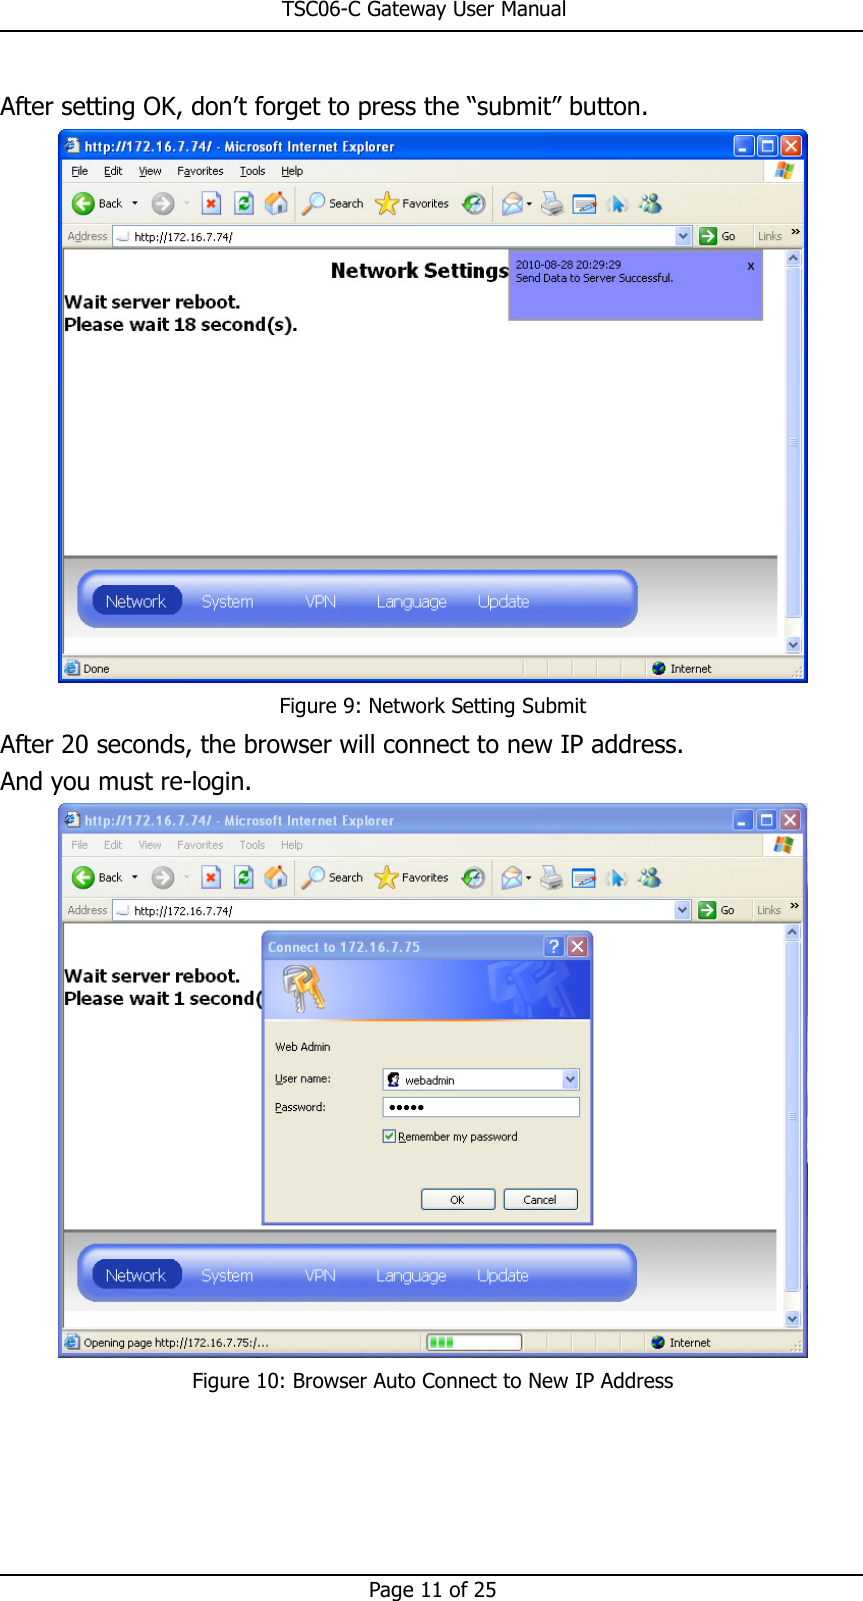                                                       TSC06-C Gateway User Manual   Page 11 of 25  After setting OK, don’t forget to press the “submit” button.  Figure 9: Network Setting Submit After 20 seconds, the browser will connect to new IP address.   And you must re-login.  Figure 10: Browser Auto Connect to New IP Address  